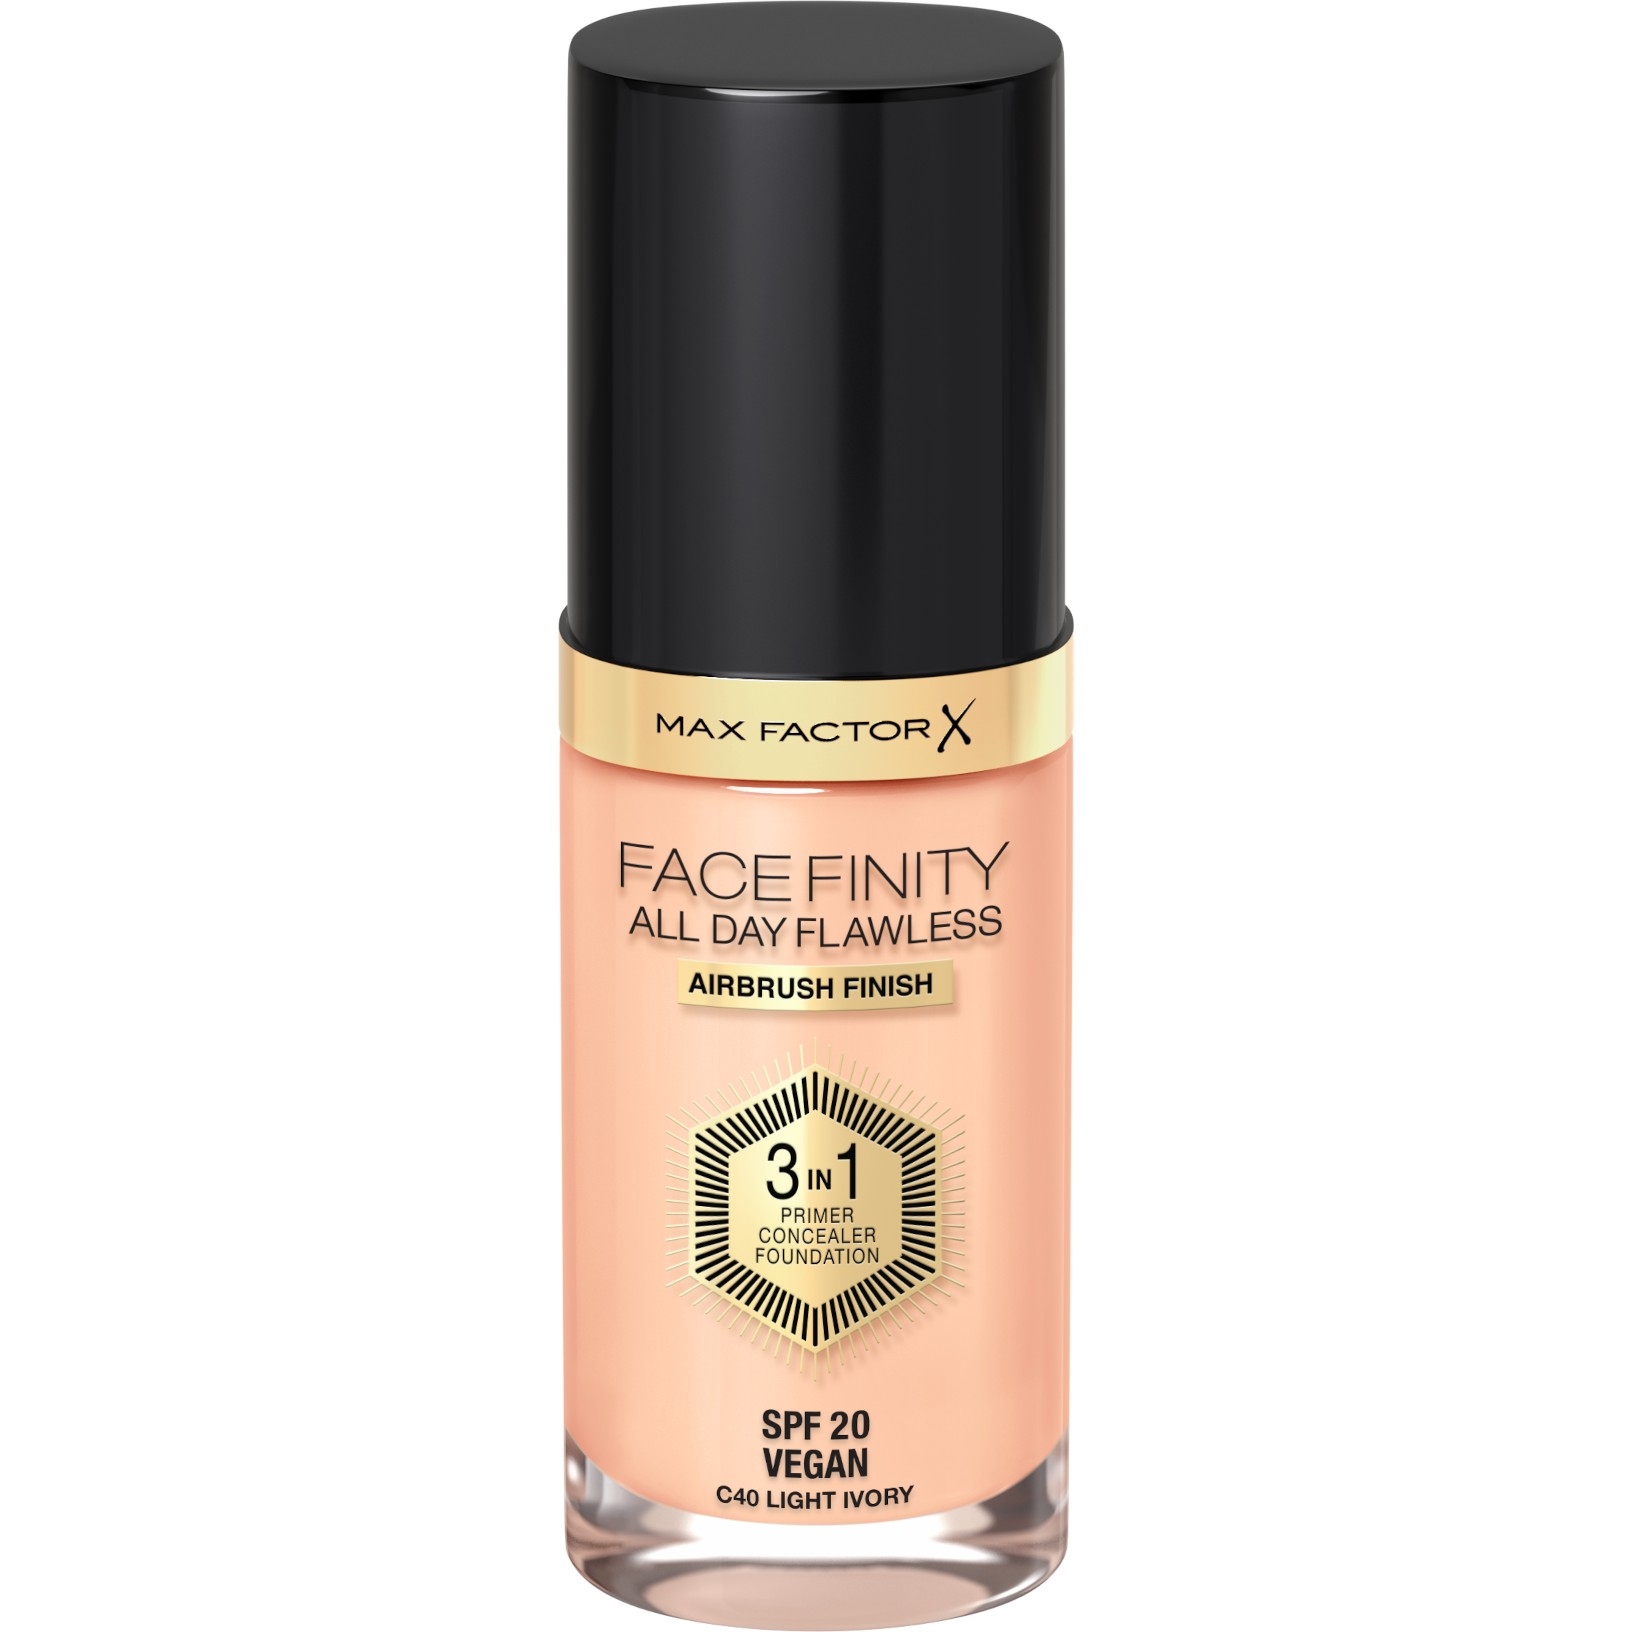 tornado Dierentuin s nachts Inspecteren Facefinity All Day Flawless 3-in-1 Vegan Foundation | Max Factor